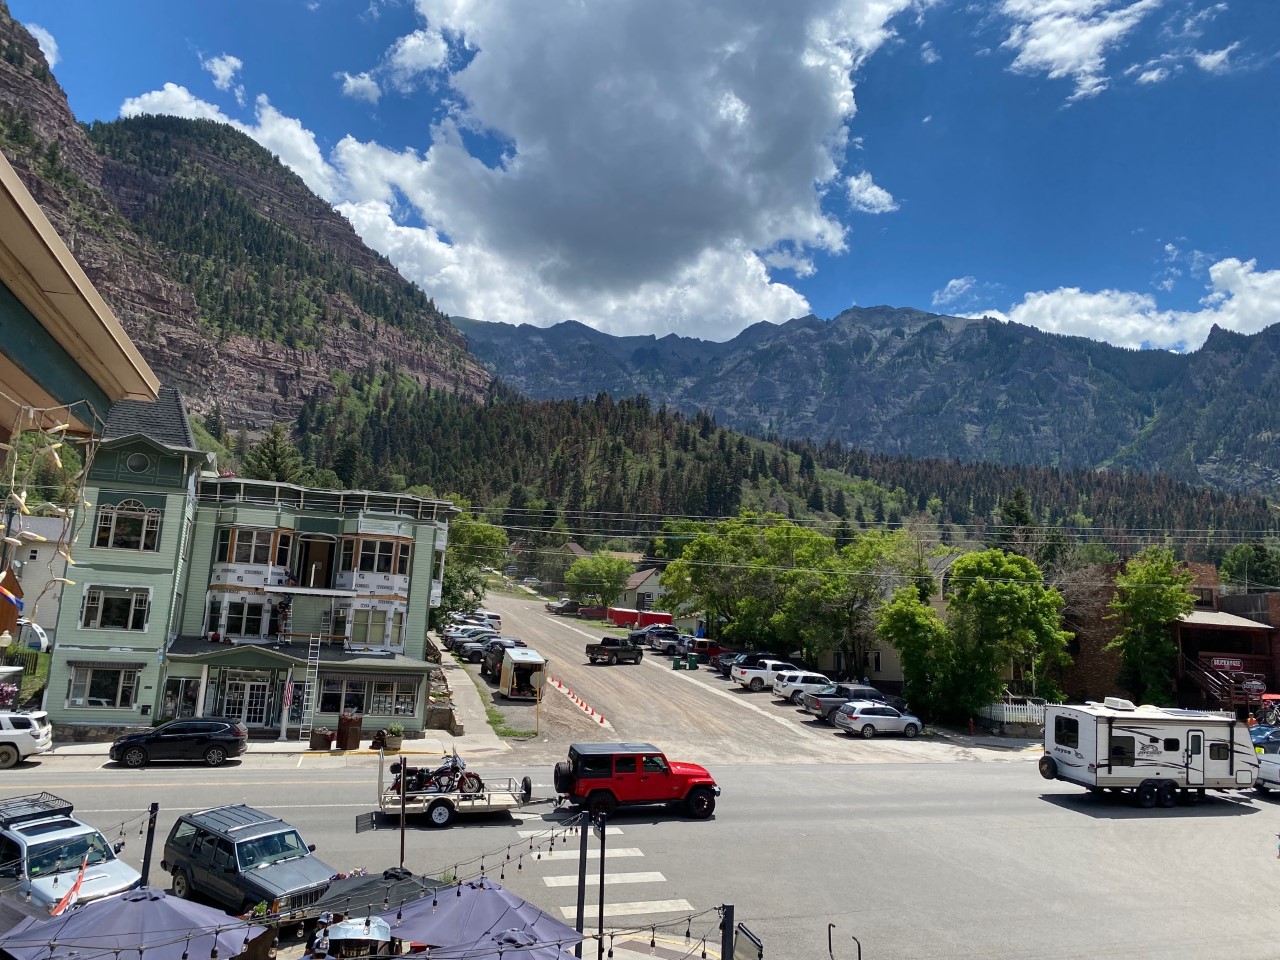 Downtown Ouray, Colorado from Gold Belt Restaurant upstairs patio.